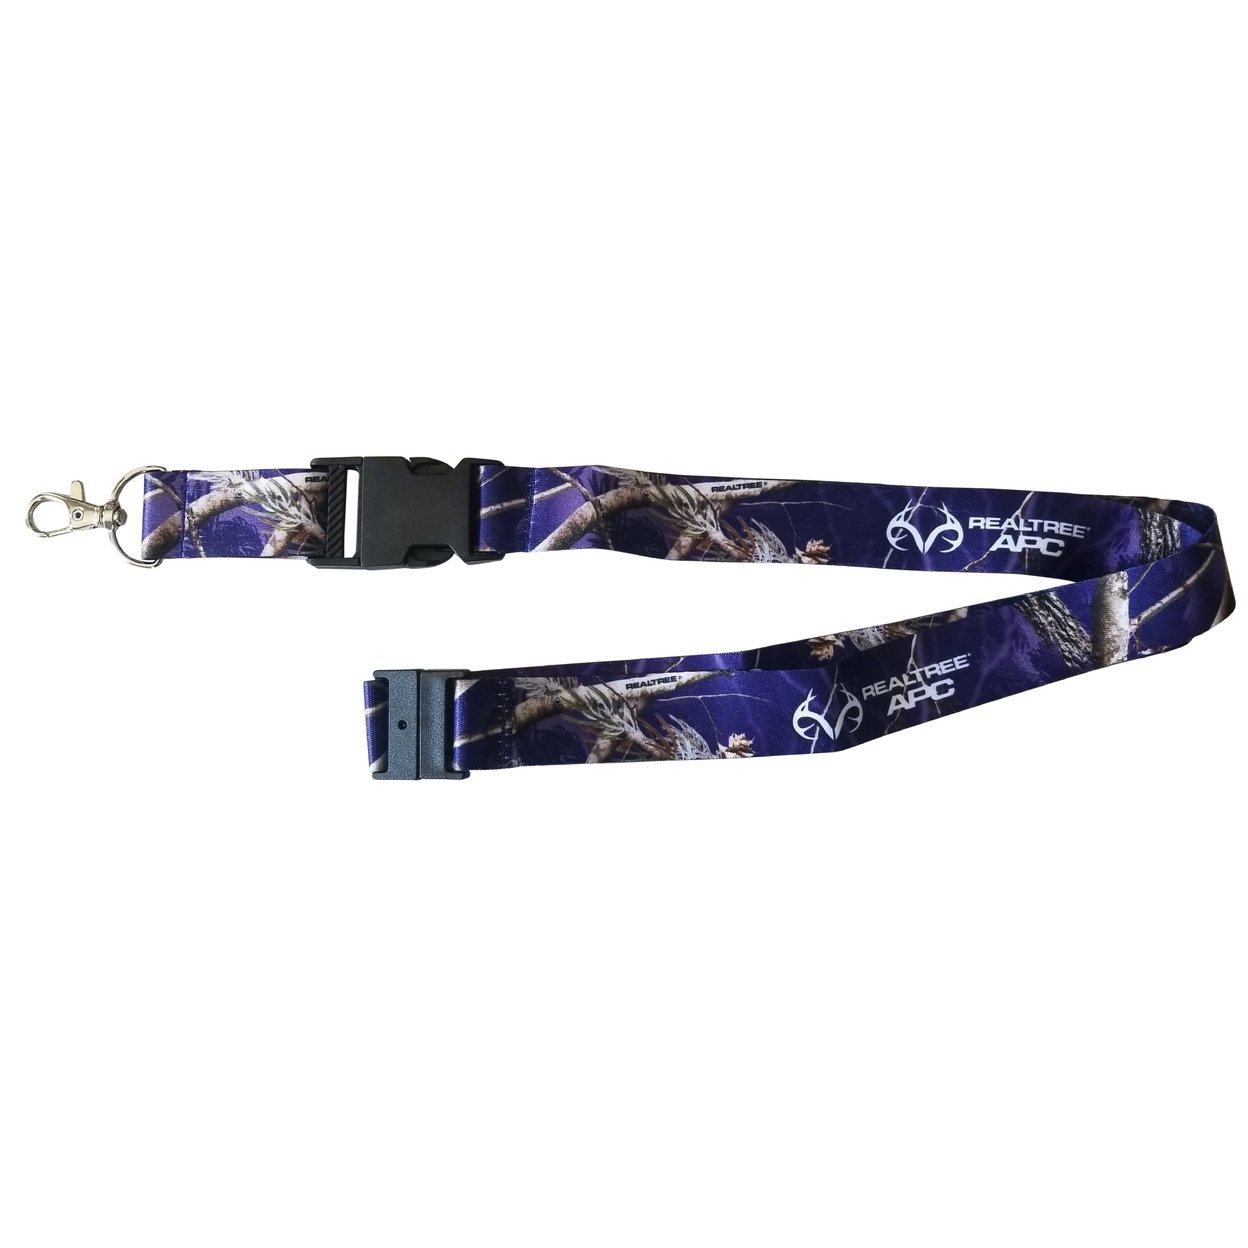 R&R INC RealTree APC Blue Navy Camo Pattern Hunting Lanyard Keychain with Clasp